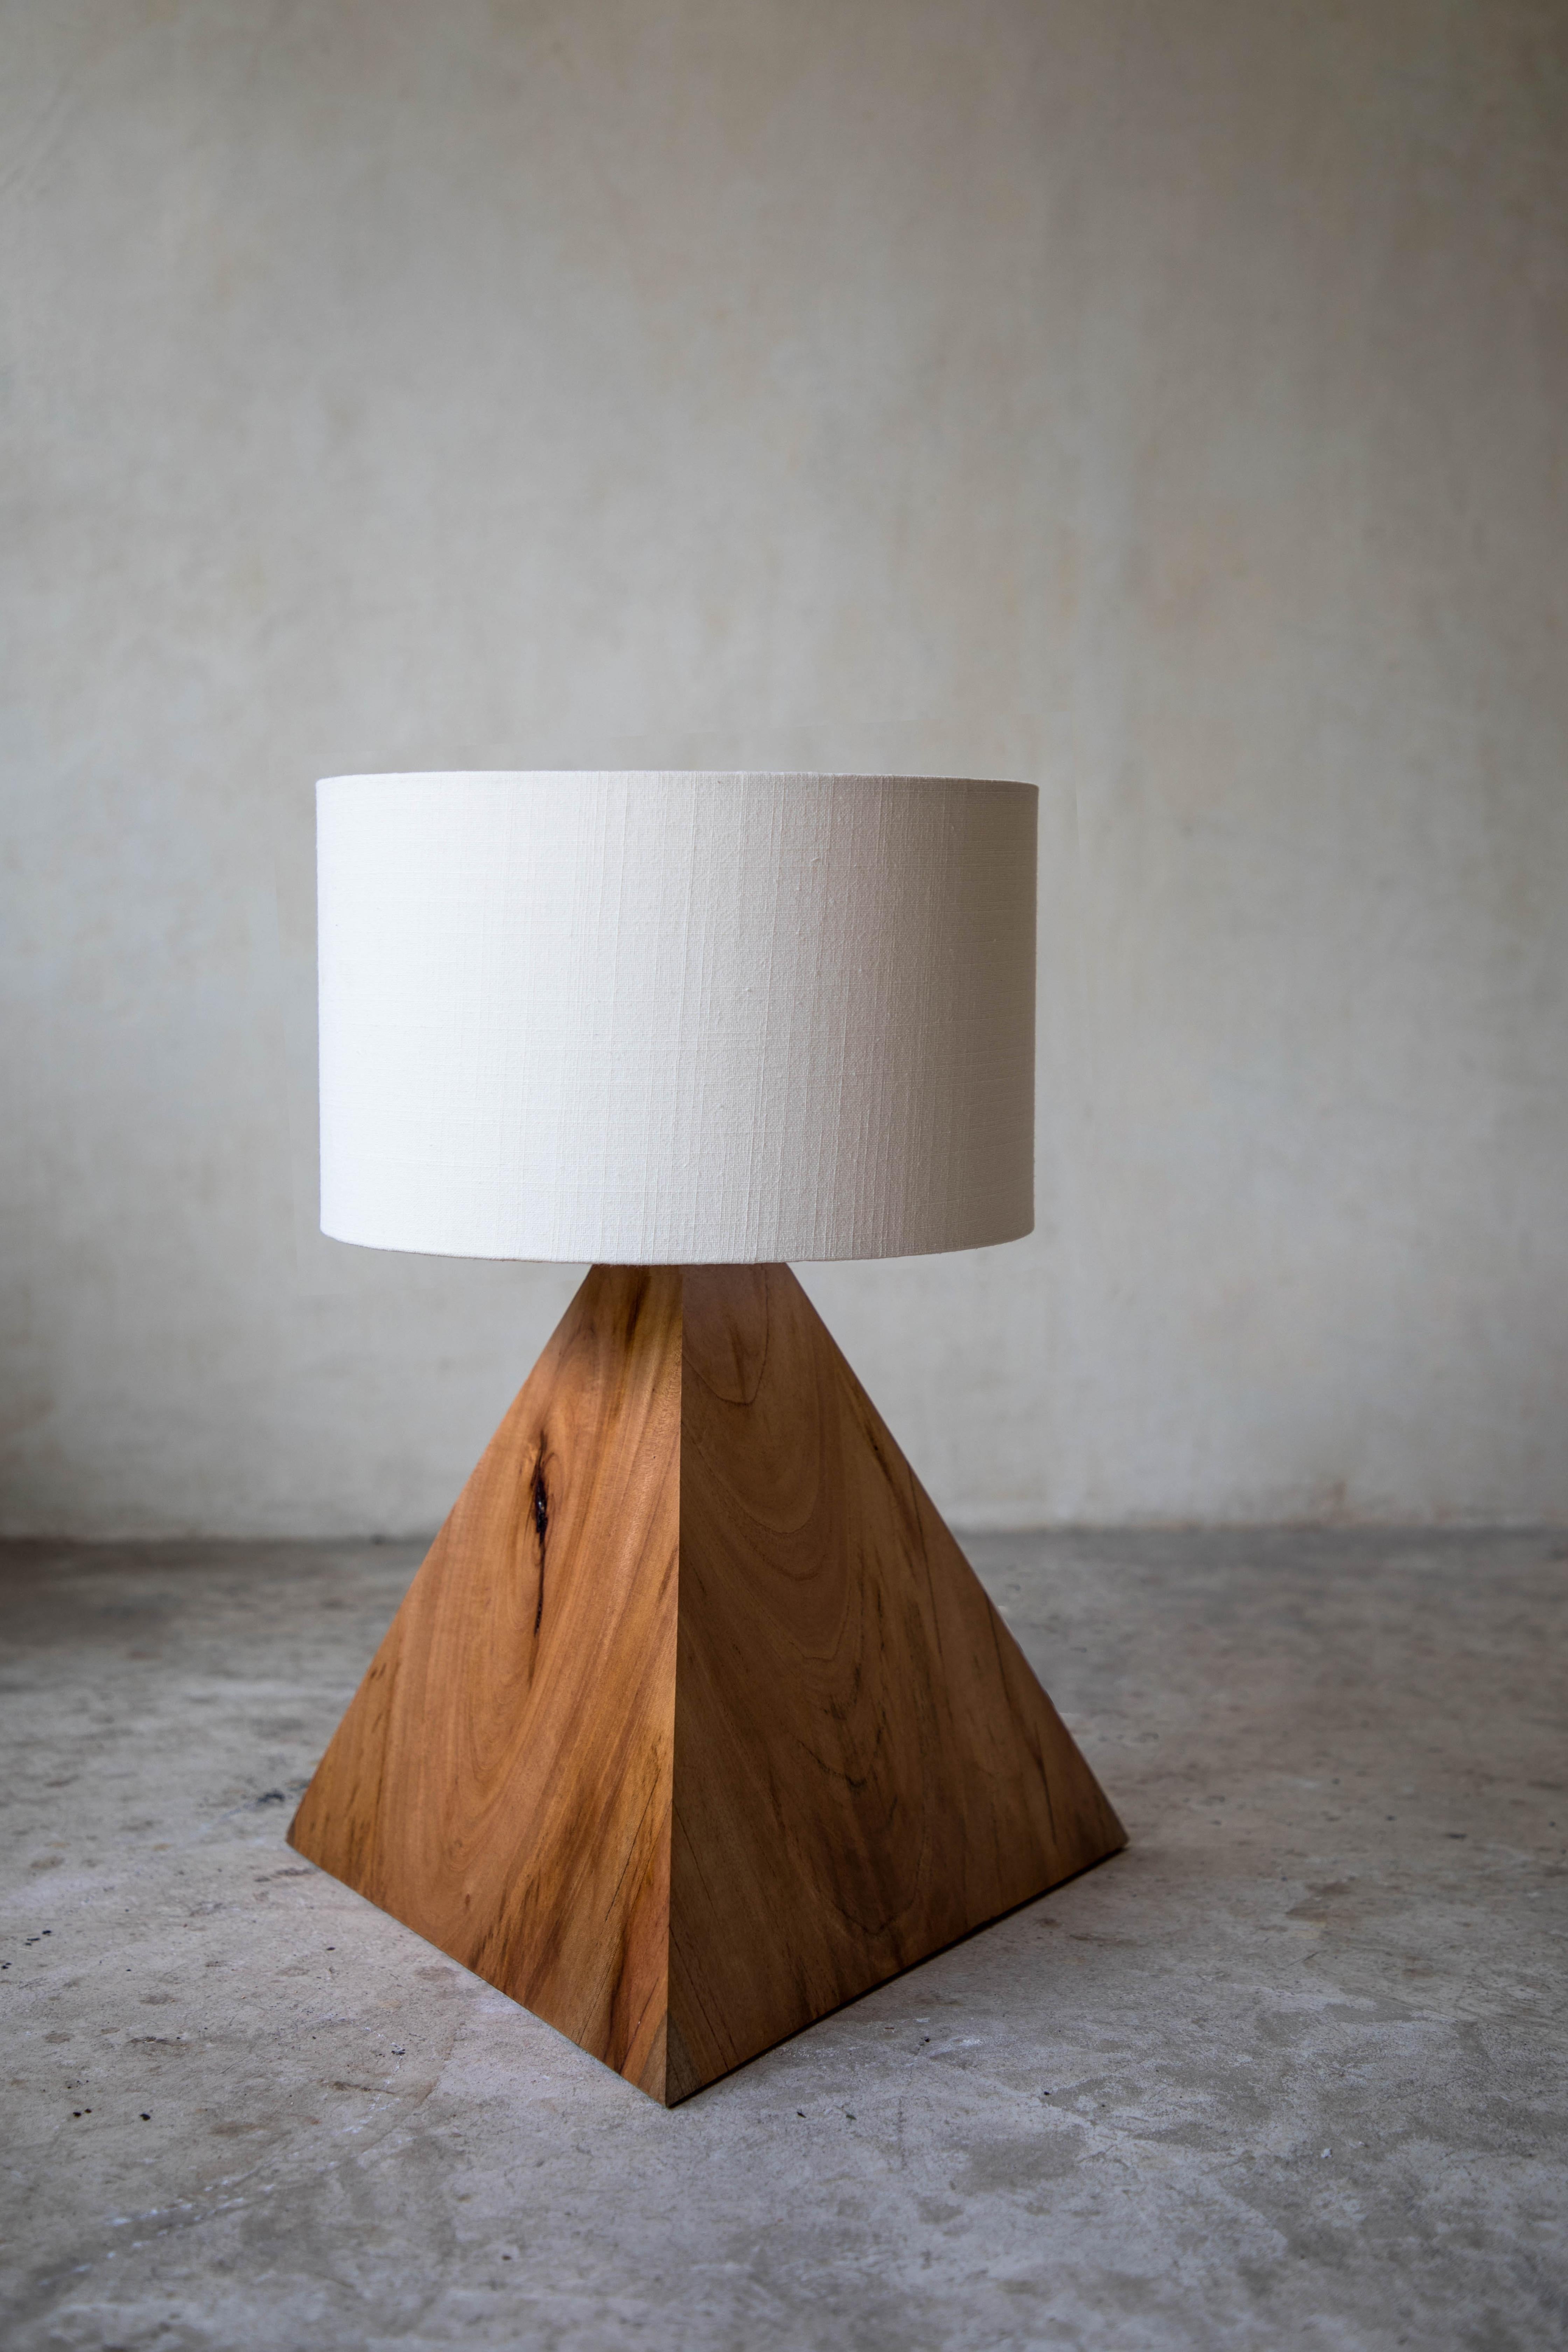 Original 07 triangle table lamp with linen screen by Daniel Orozco
Material: Jabin wood, linen.
Dimensions: D 40 x W 40 x H 44 cm
Available with palm or linen lampshade.

Jabin wood triangle table lamp, with palm or linen screen. Handmade by